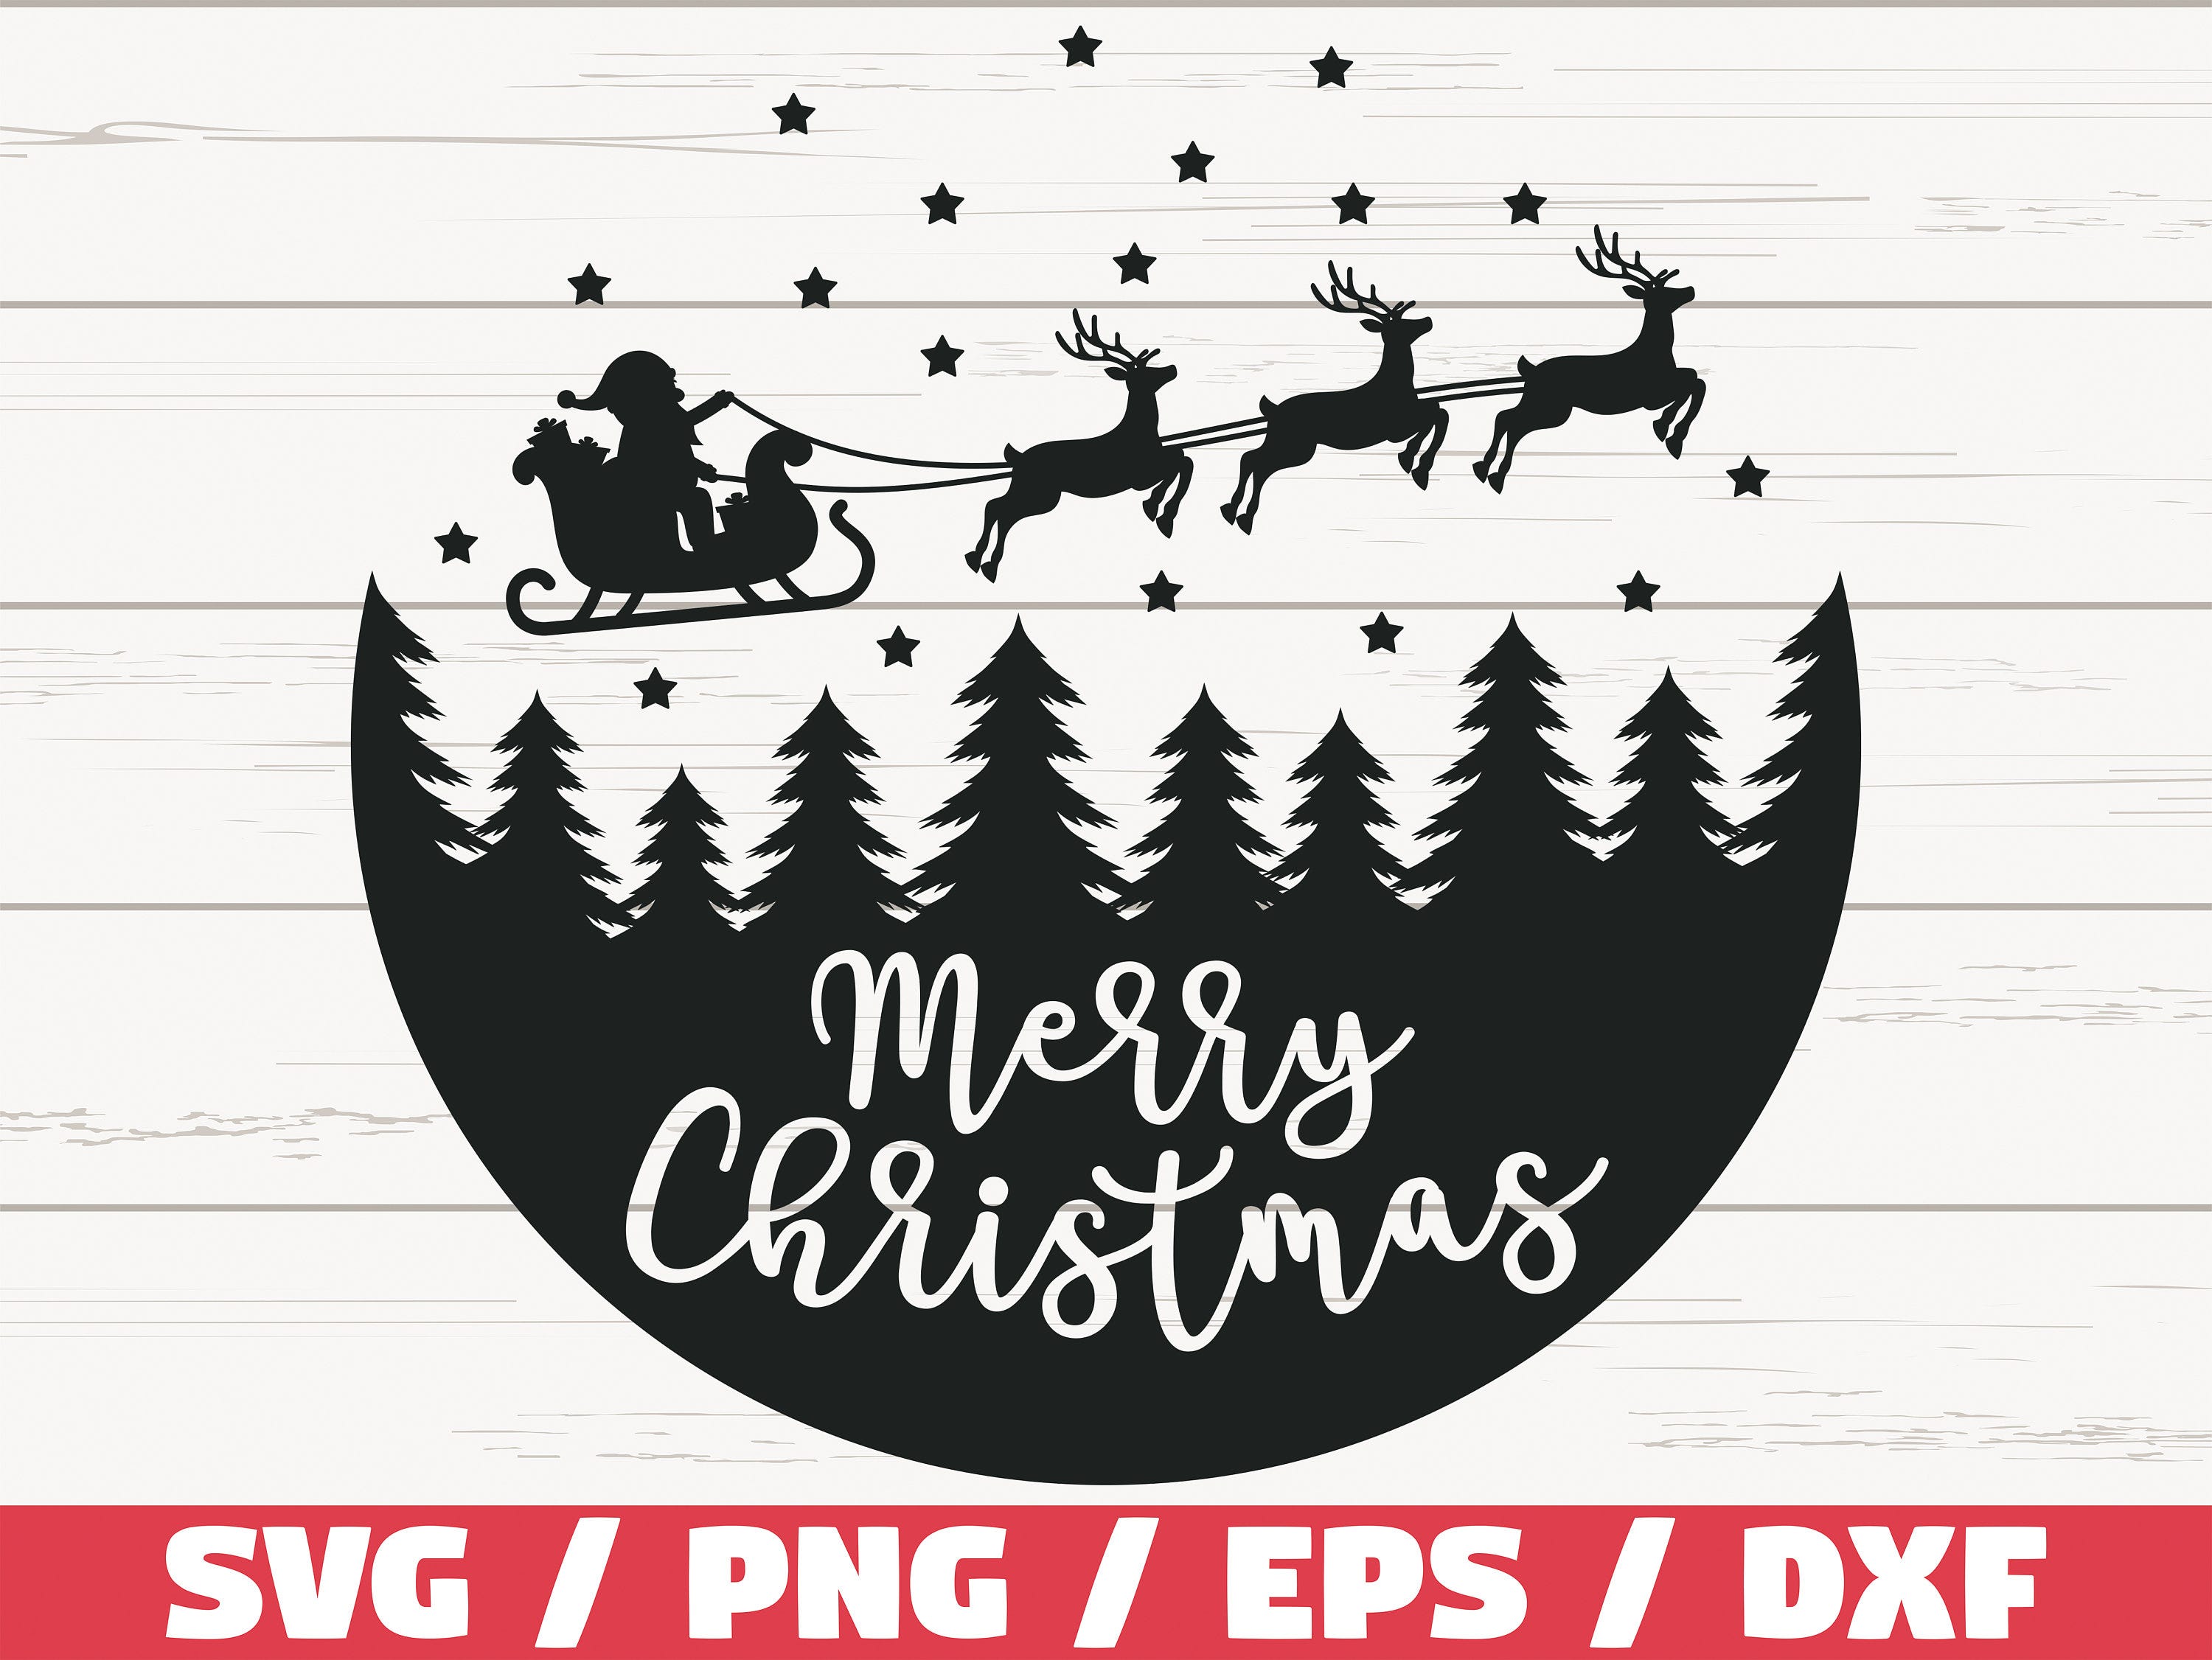 Merry Christmas SVG / Christmas Scene With Santa SVG / Cut File / Cricut / Commercial use / Silhouette / DXF file / Christmas decoration